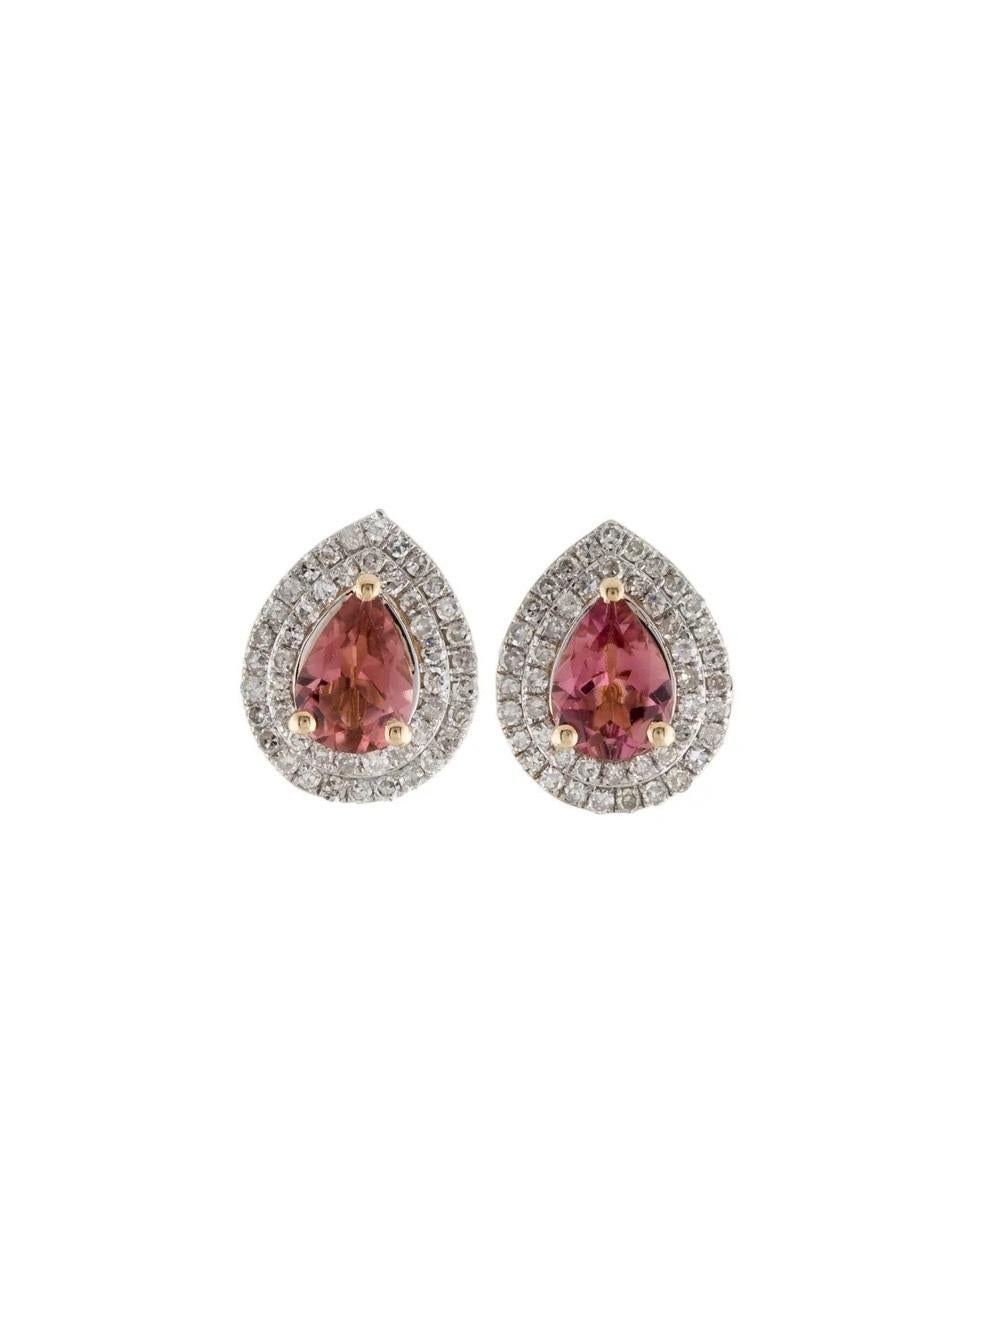 14K Tourmaline & Diamond Stud Earrings - Elegant Gemstone, Statement Jewelry In New Condition For Sale In Holtsville, NY